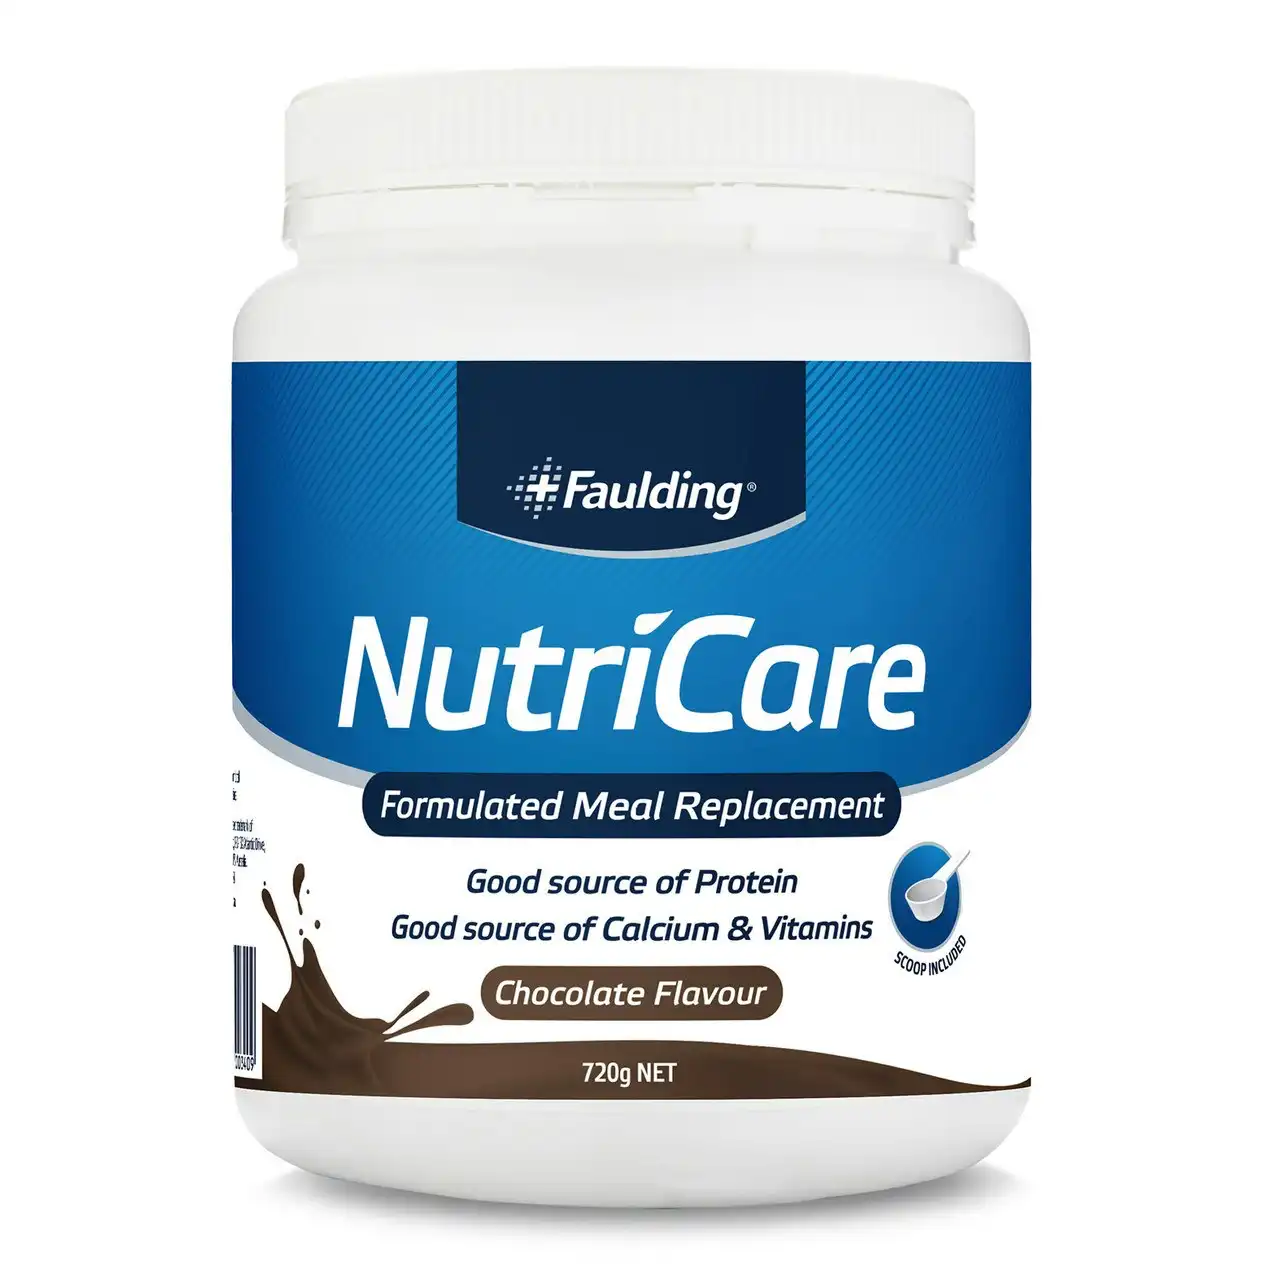 Faulding NutriCare Chocolate Meal Replacement 720g